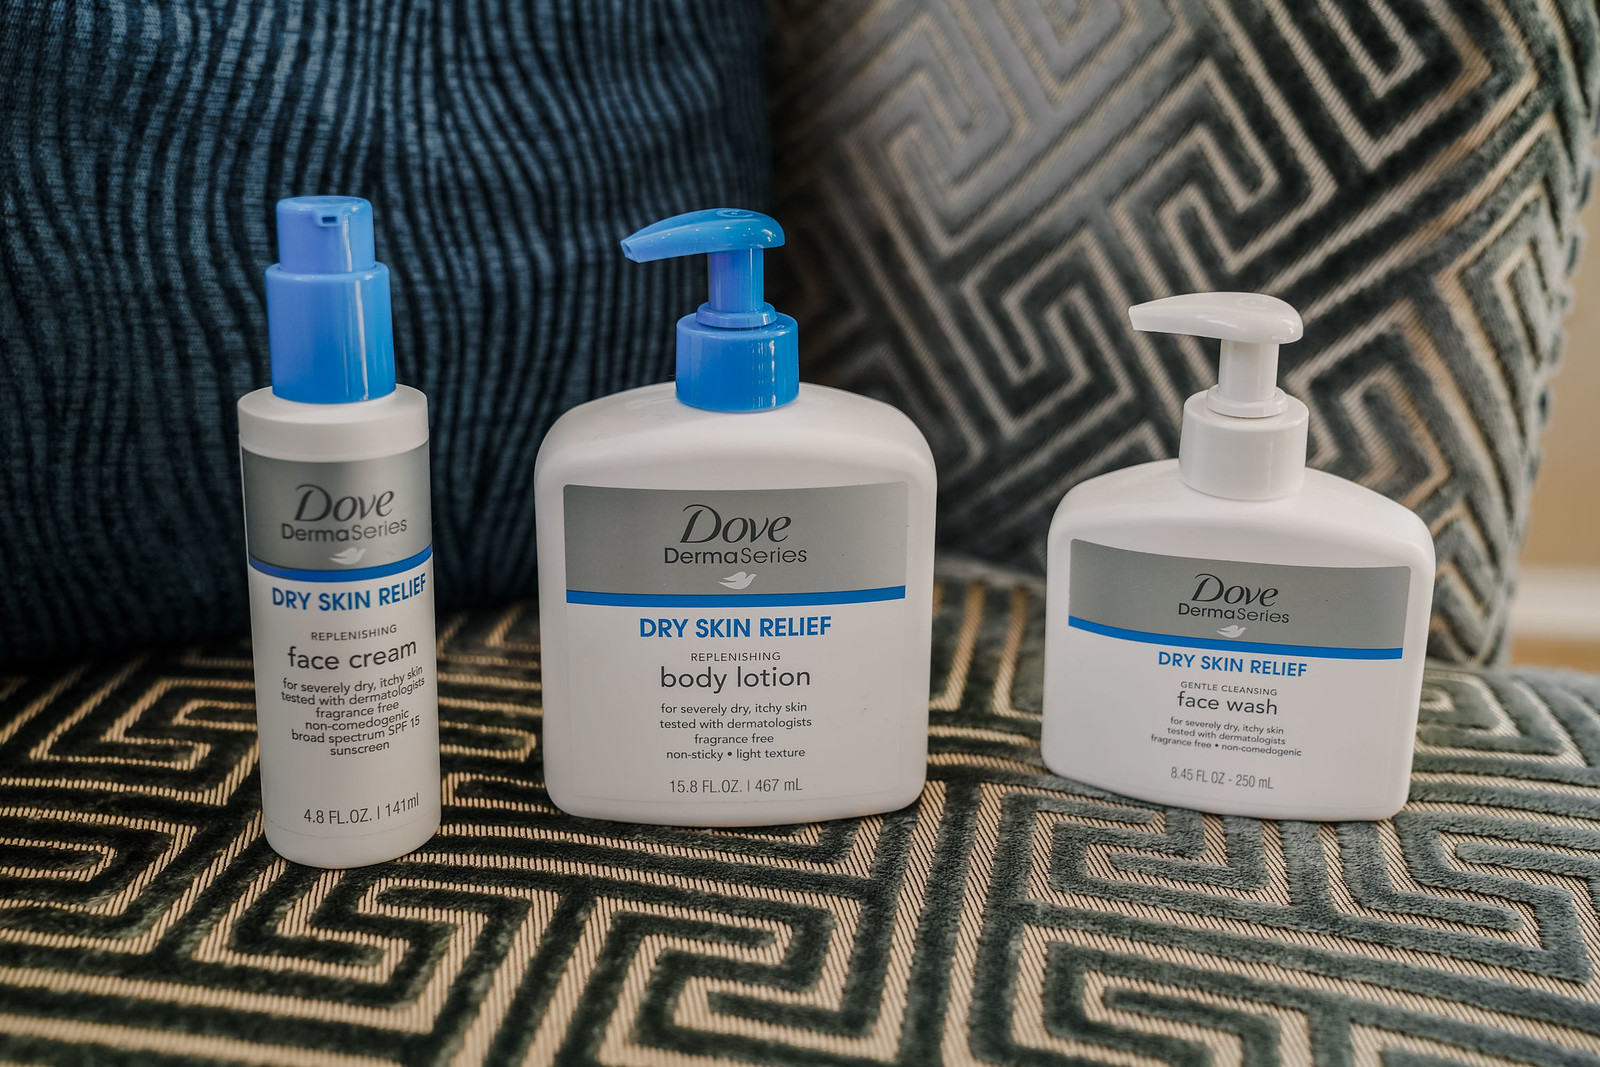 hydrate your skin in the winter with dove derma